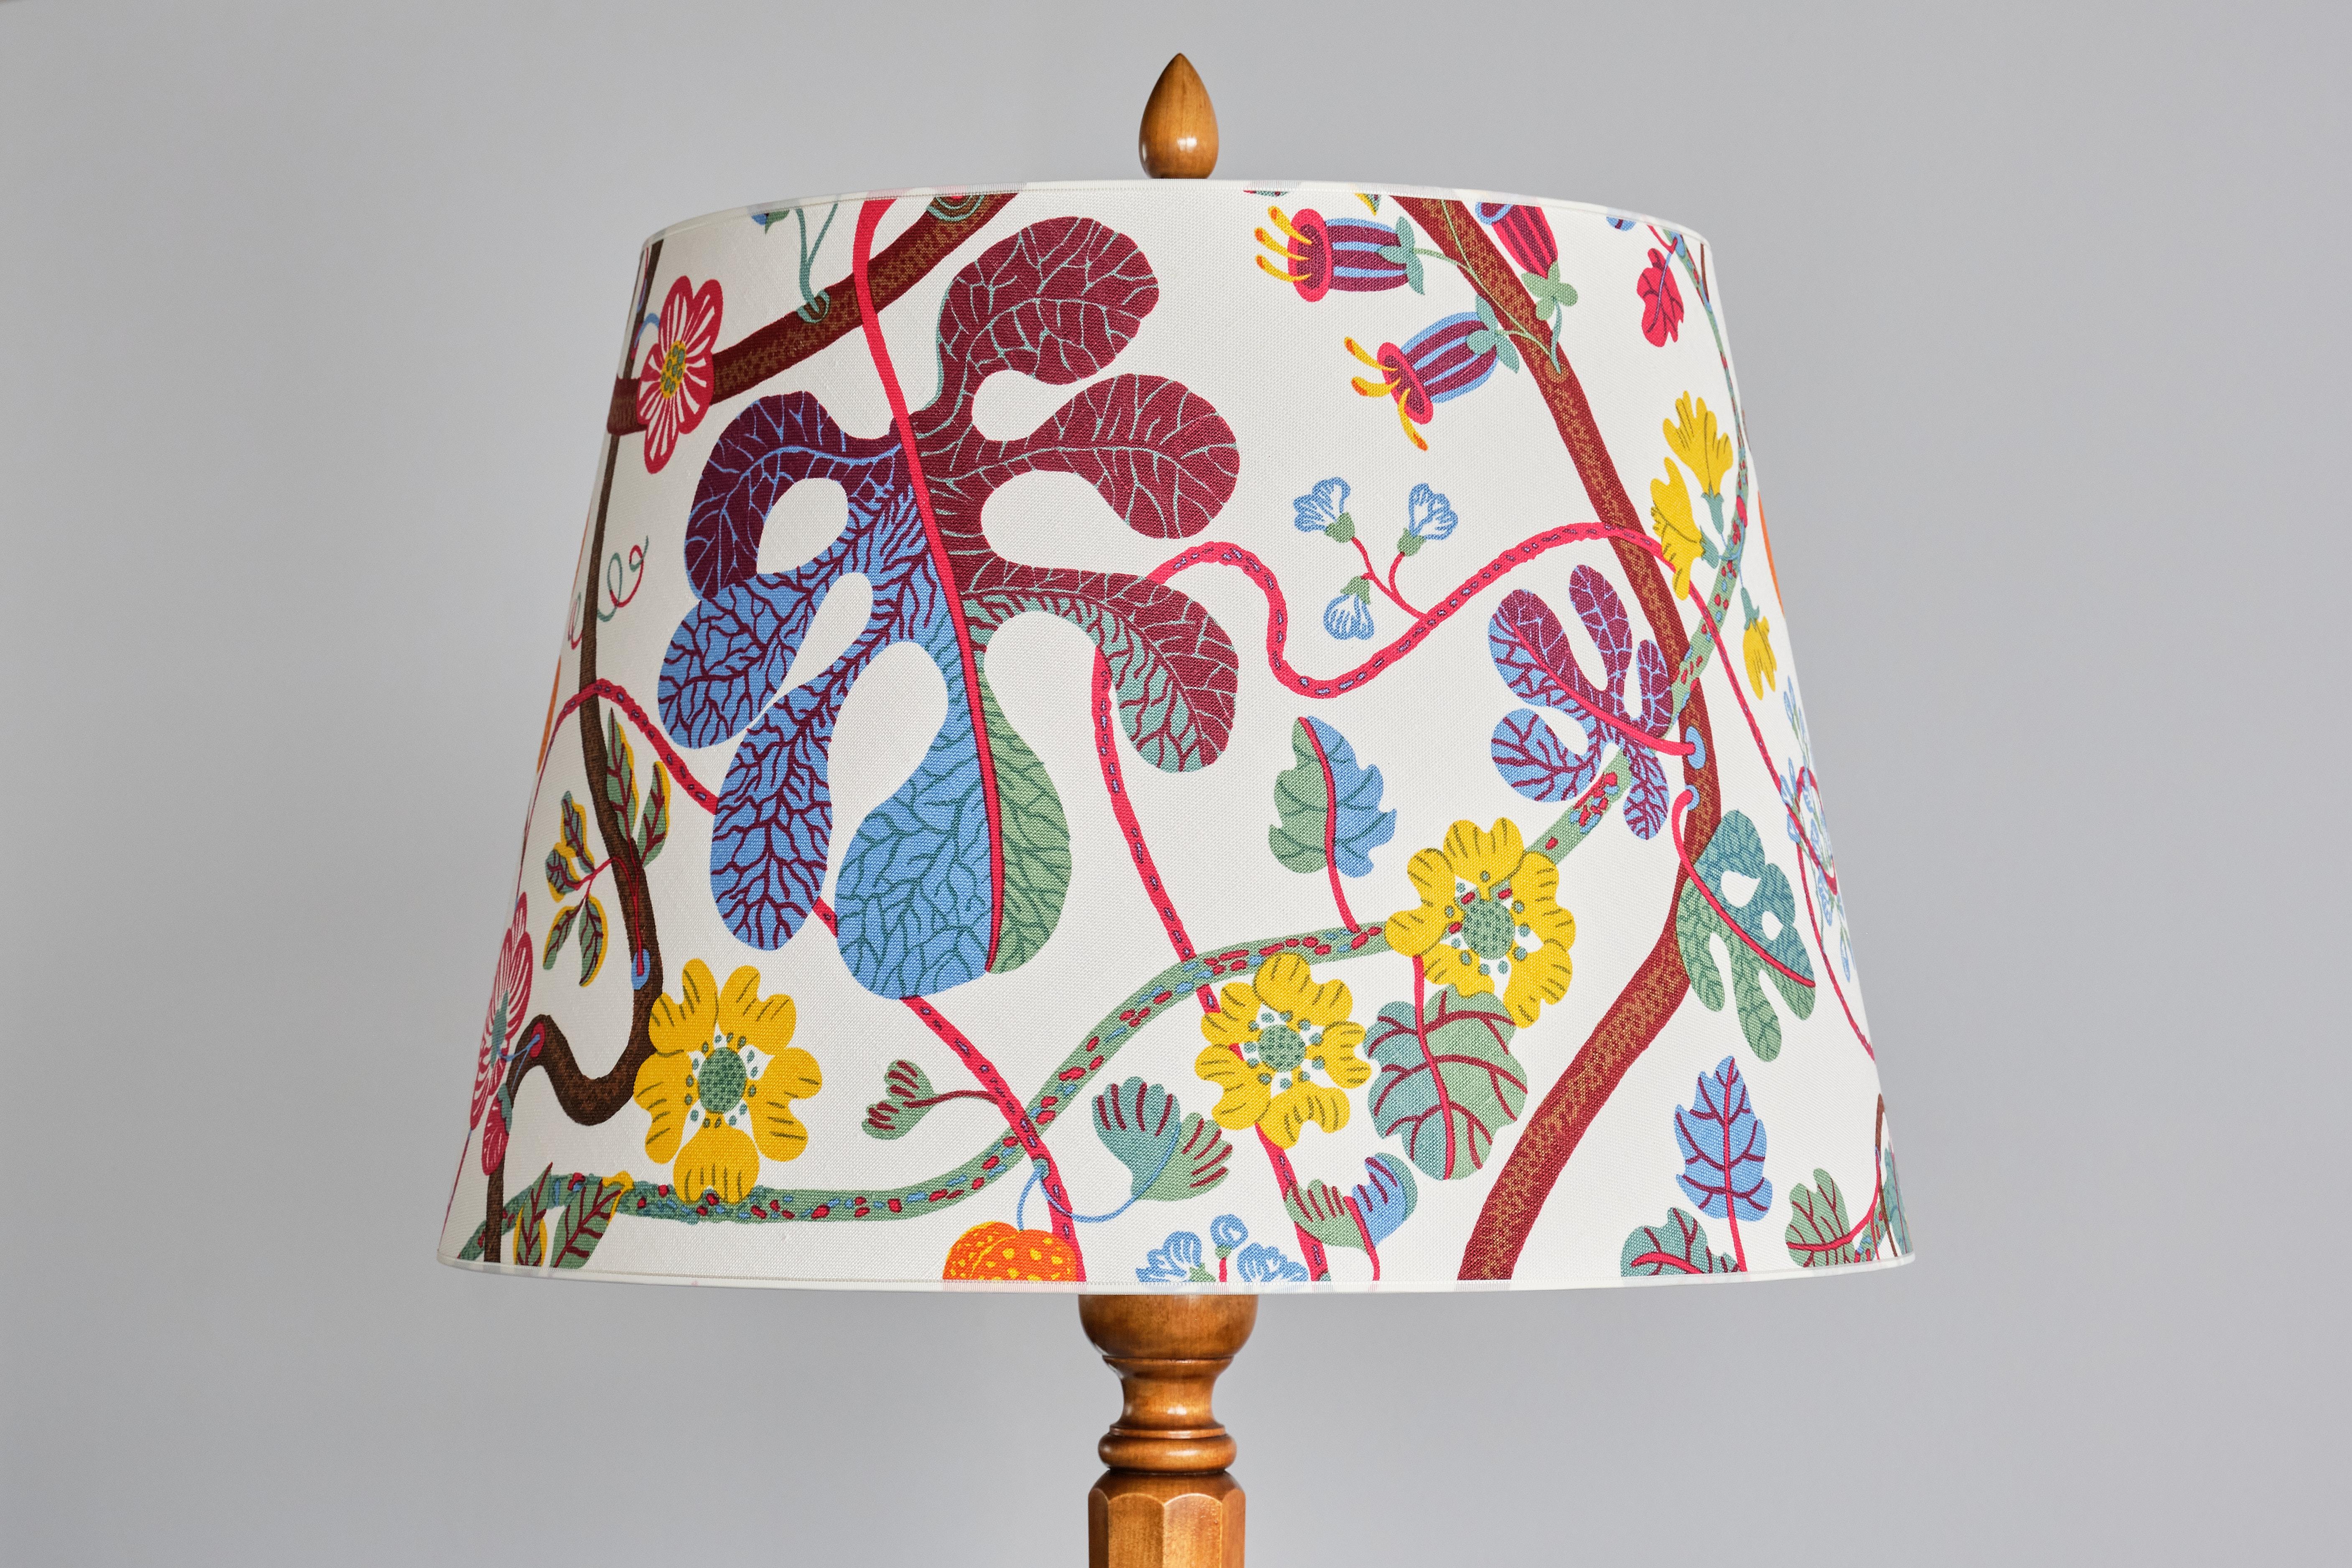 Rare Otto Schulz Floor Lamp in Birch Wood, Josef Frank Shade, Boet, Sweden, 1928 In Good Condition For Sale In The Hague, NL